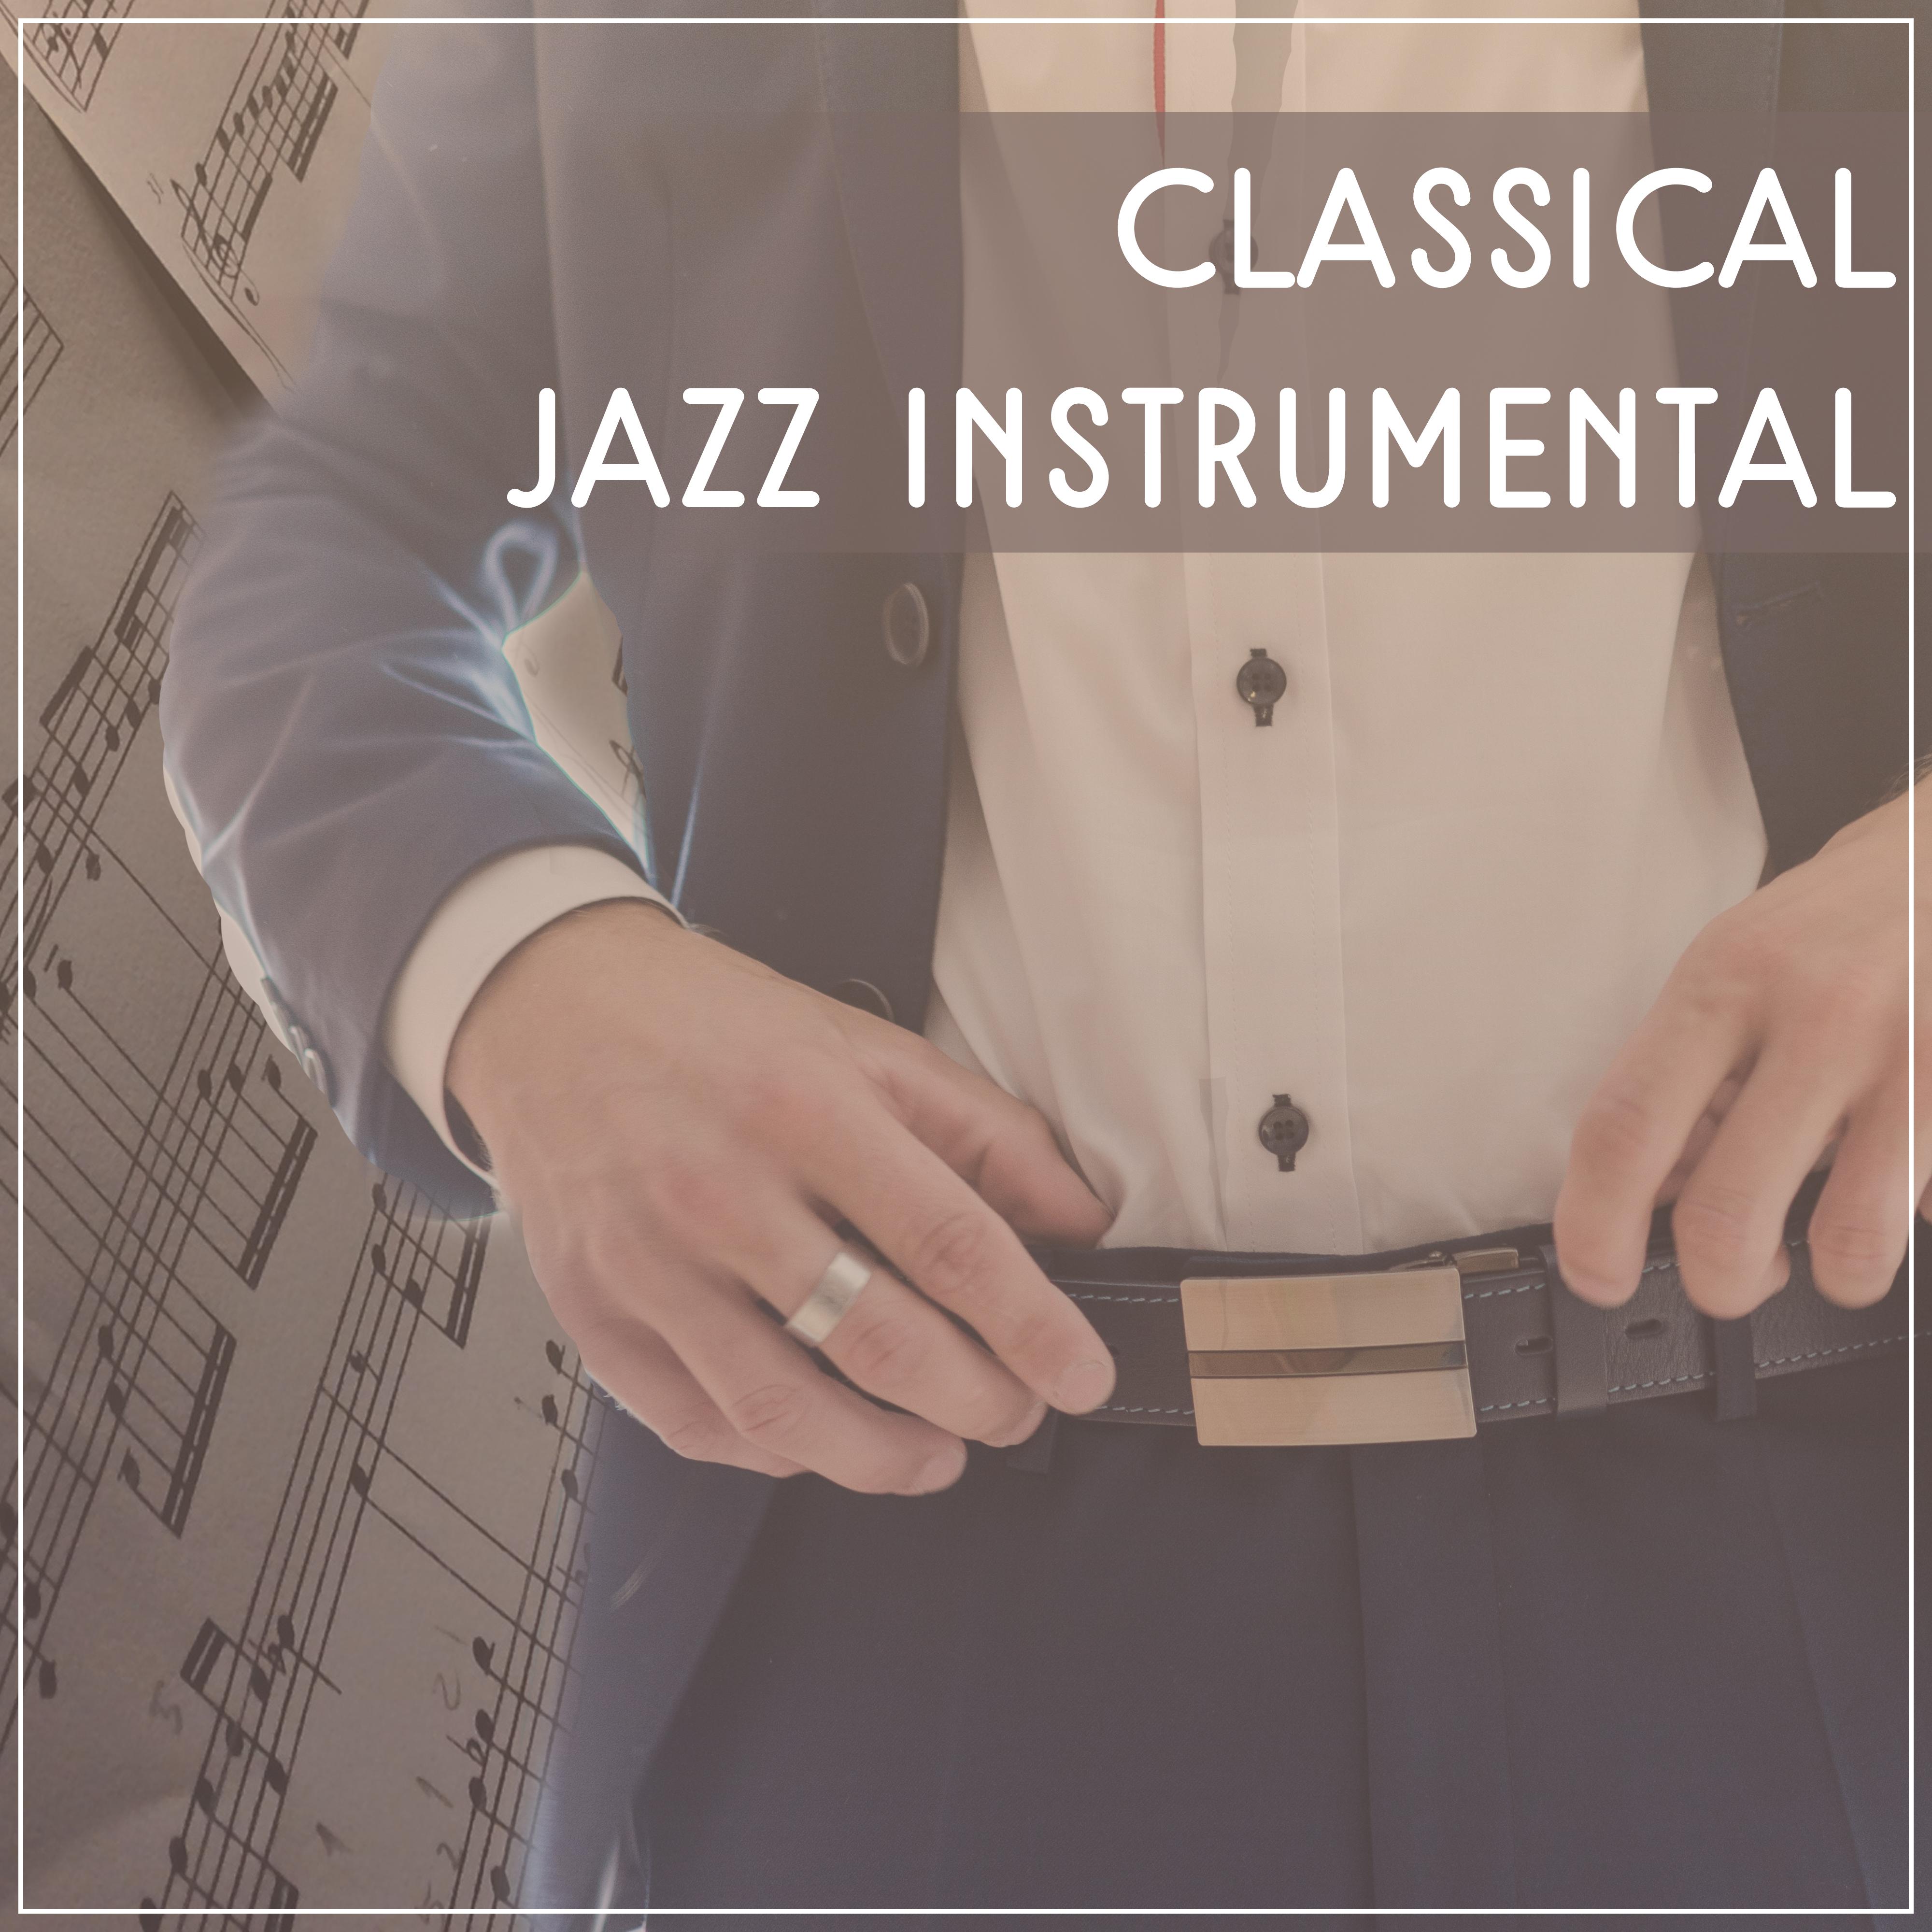 Classical Jazz Instrumental – Ambient Smooth Jazz, Piano Bar, Jazz Lounge, Relaxed Piano